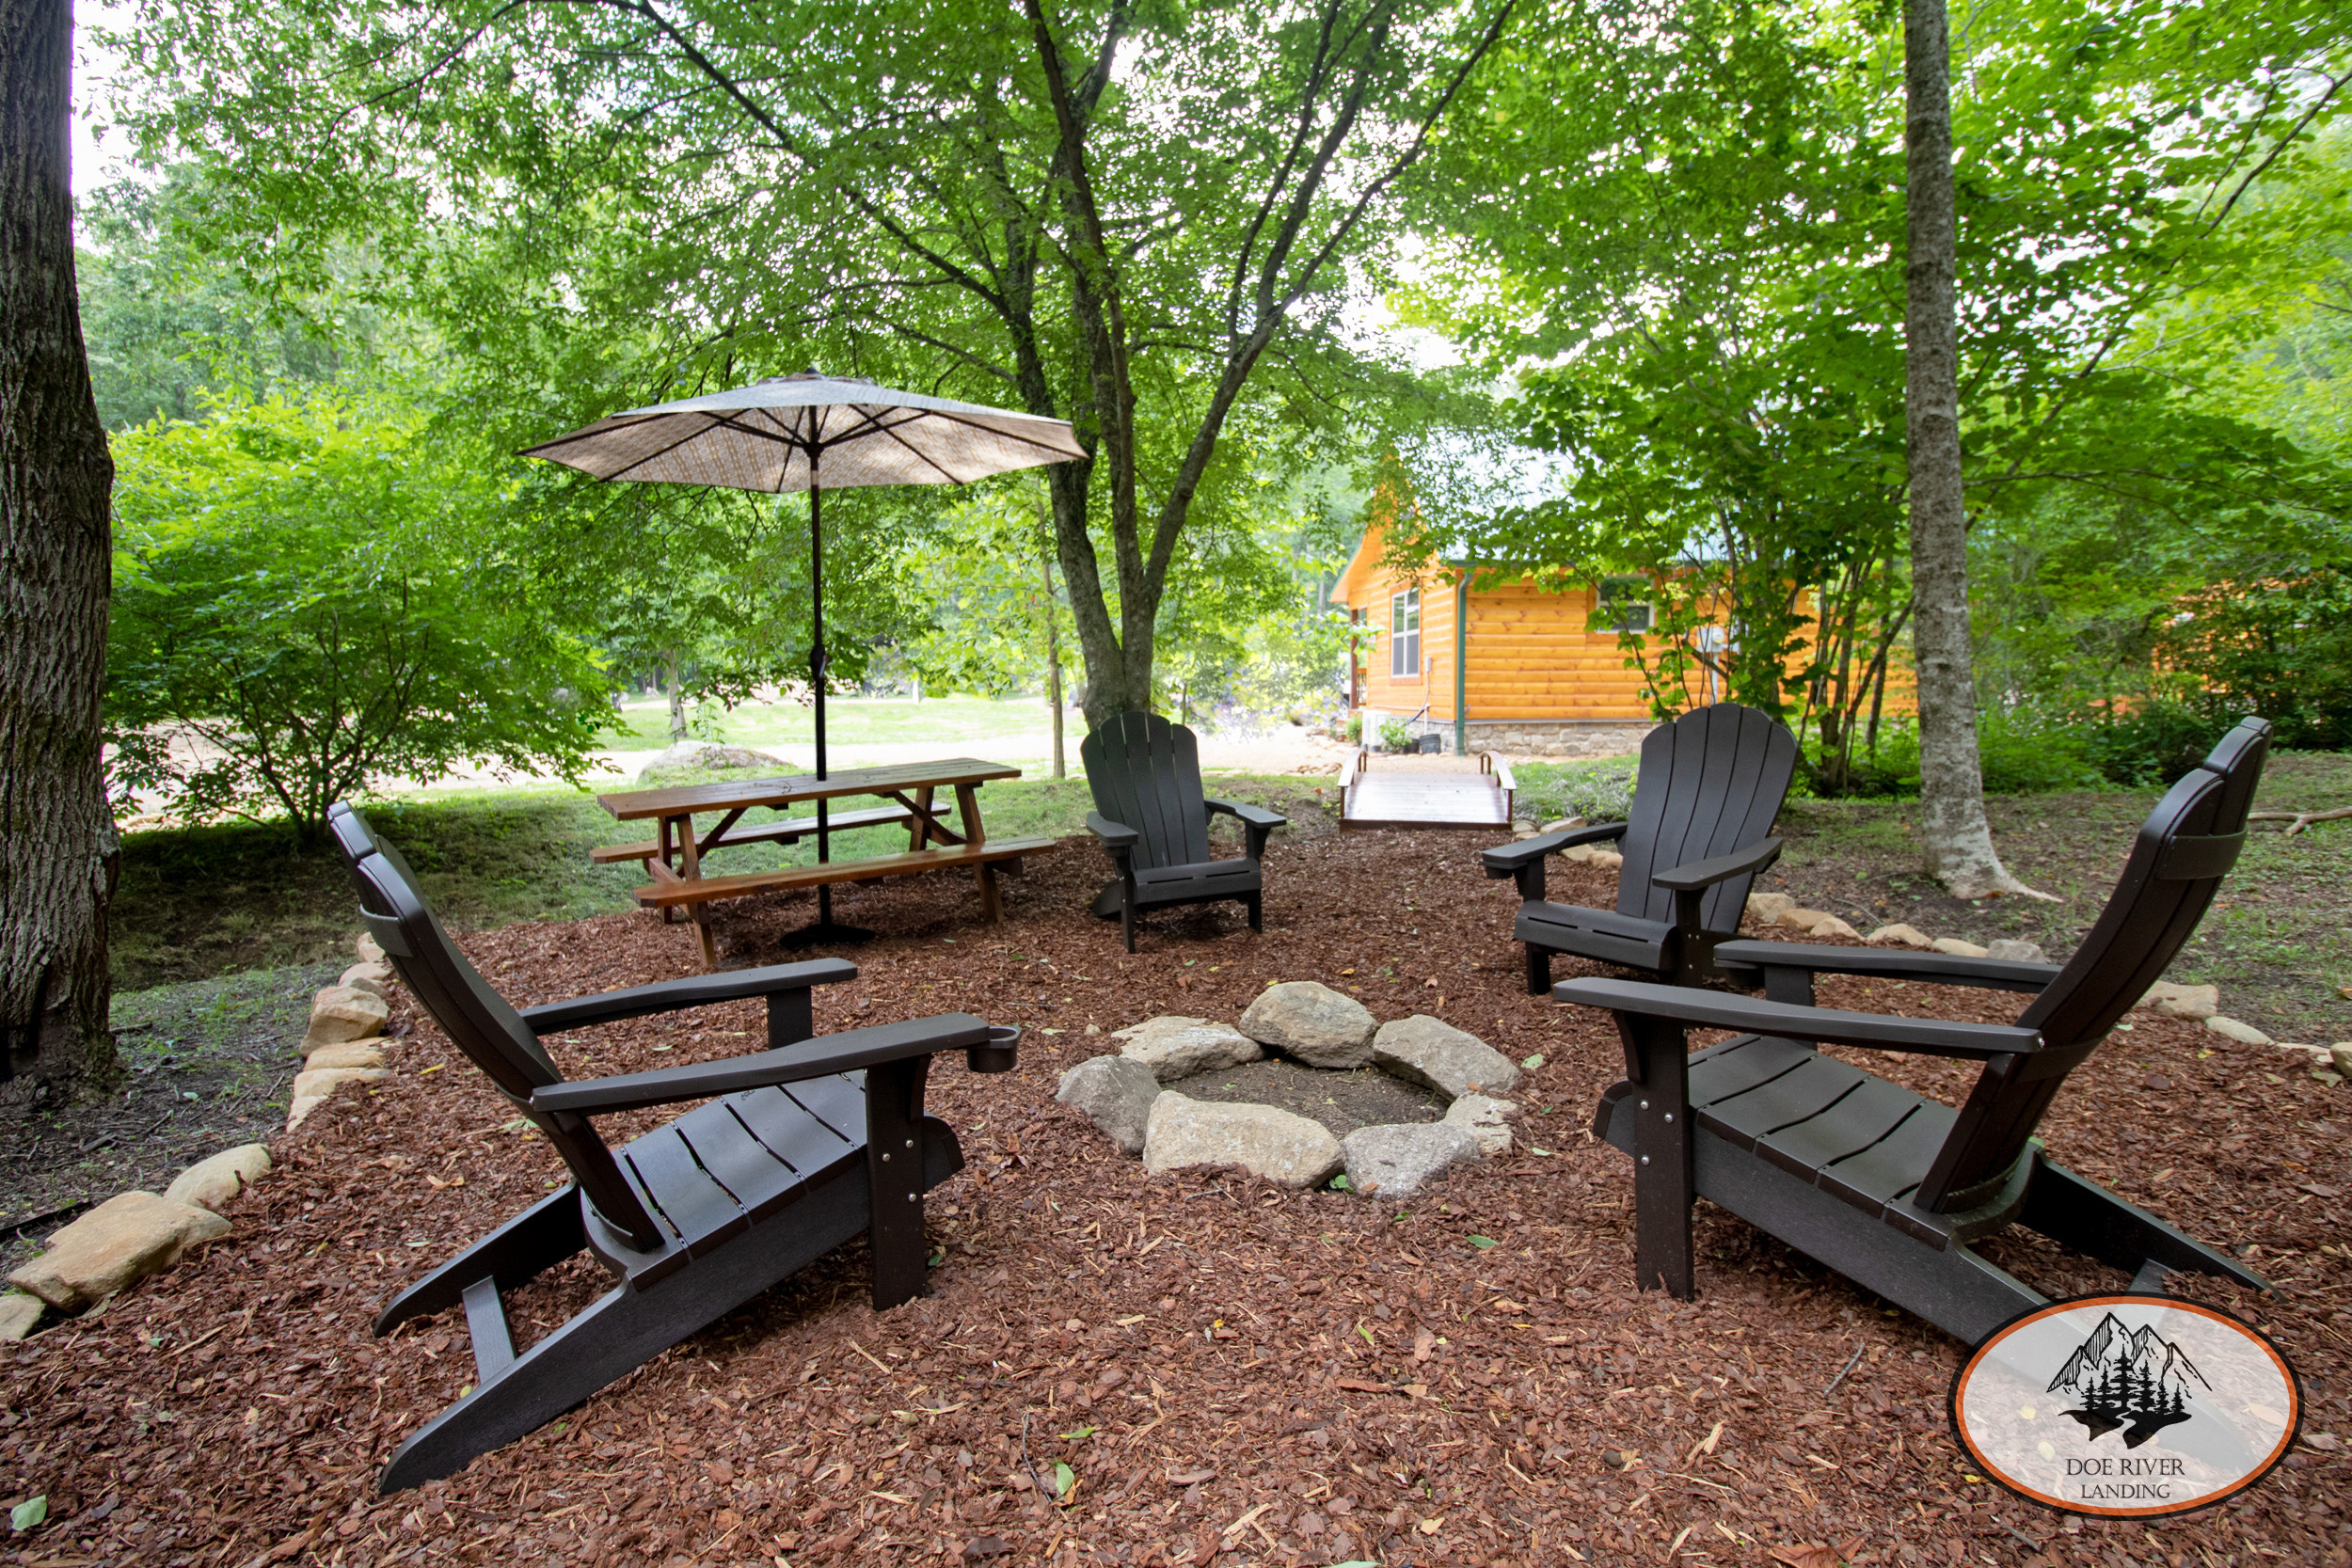 Doe River Landing campground in Roan Mountain, TN. Best vacation rental near Elizabethton, TN and Johnson City TN. Brown Trout Cabin private riverside campsite with fire pit, picnic table, grill, and umbrella.